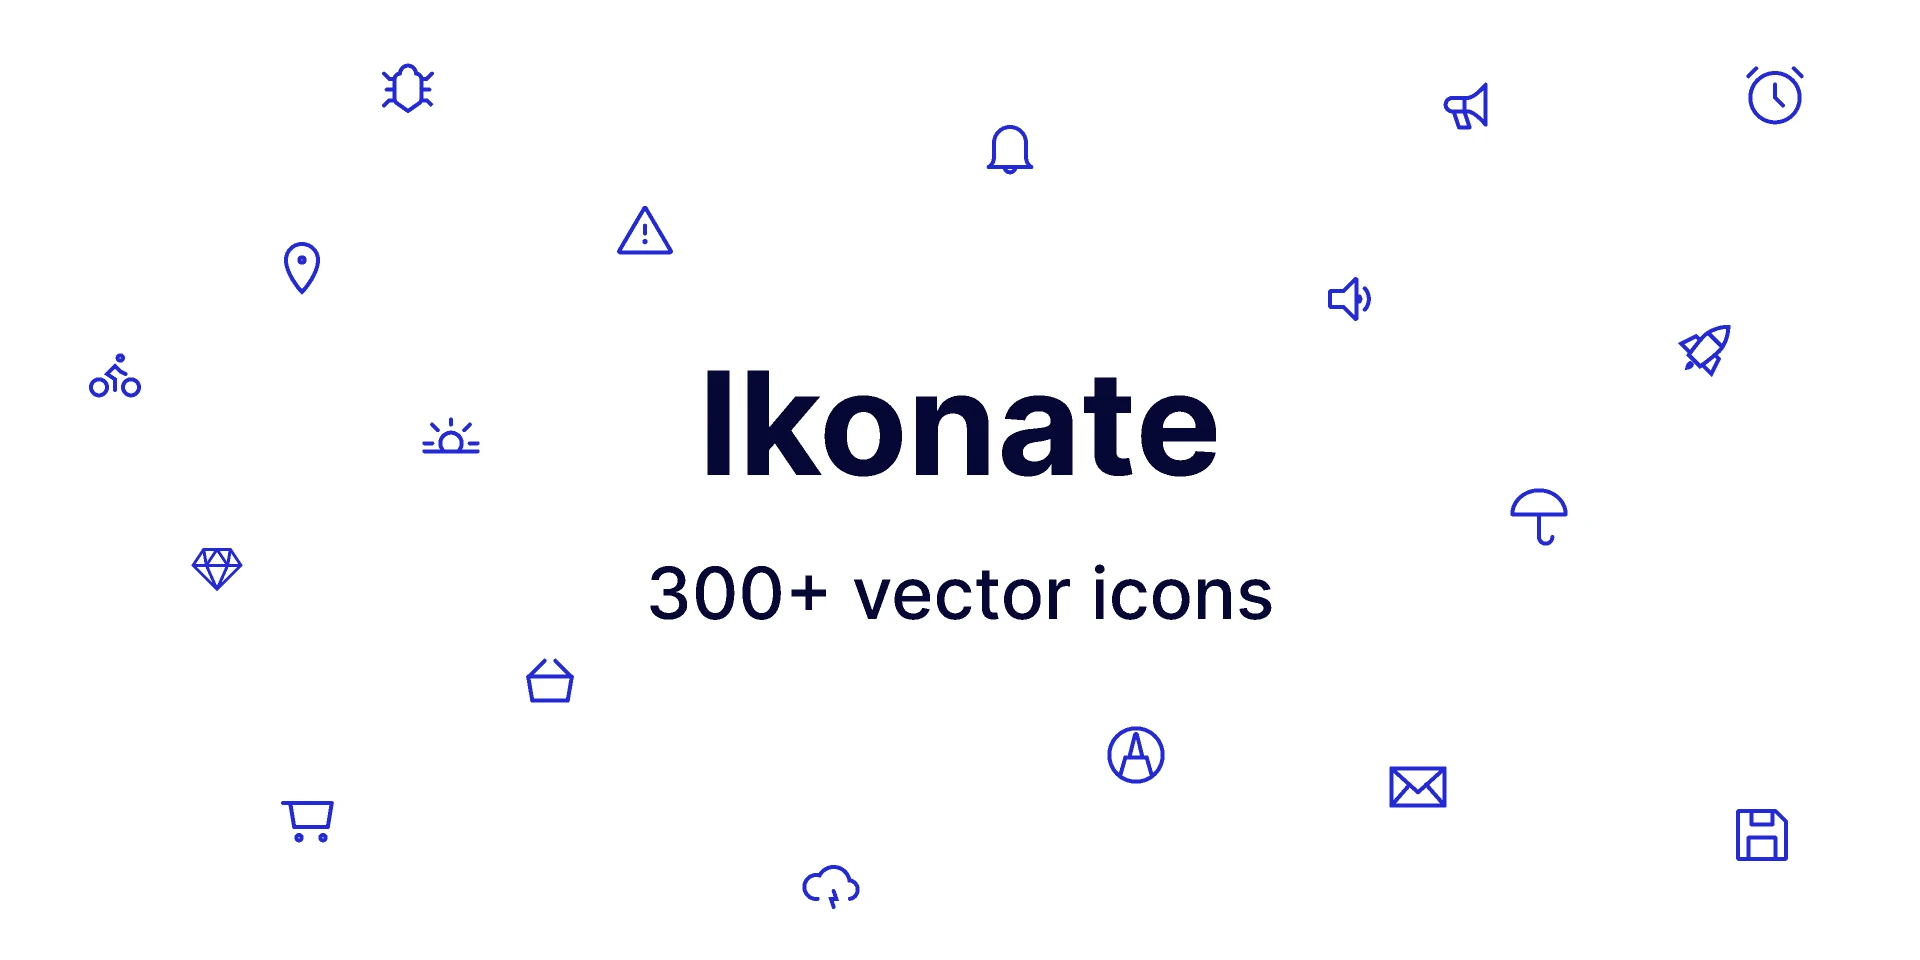 Ikonate  free vector icons for Figma and Adobe XD